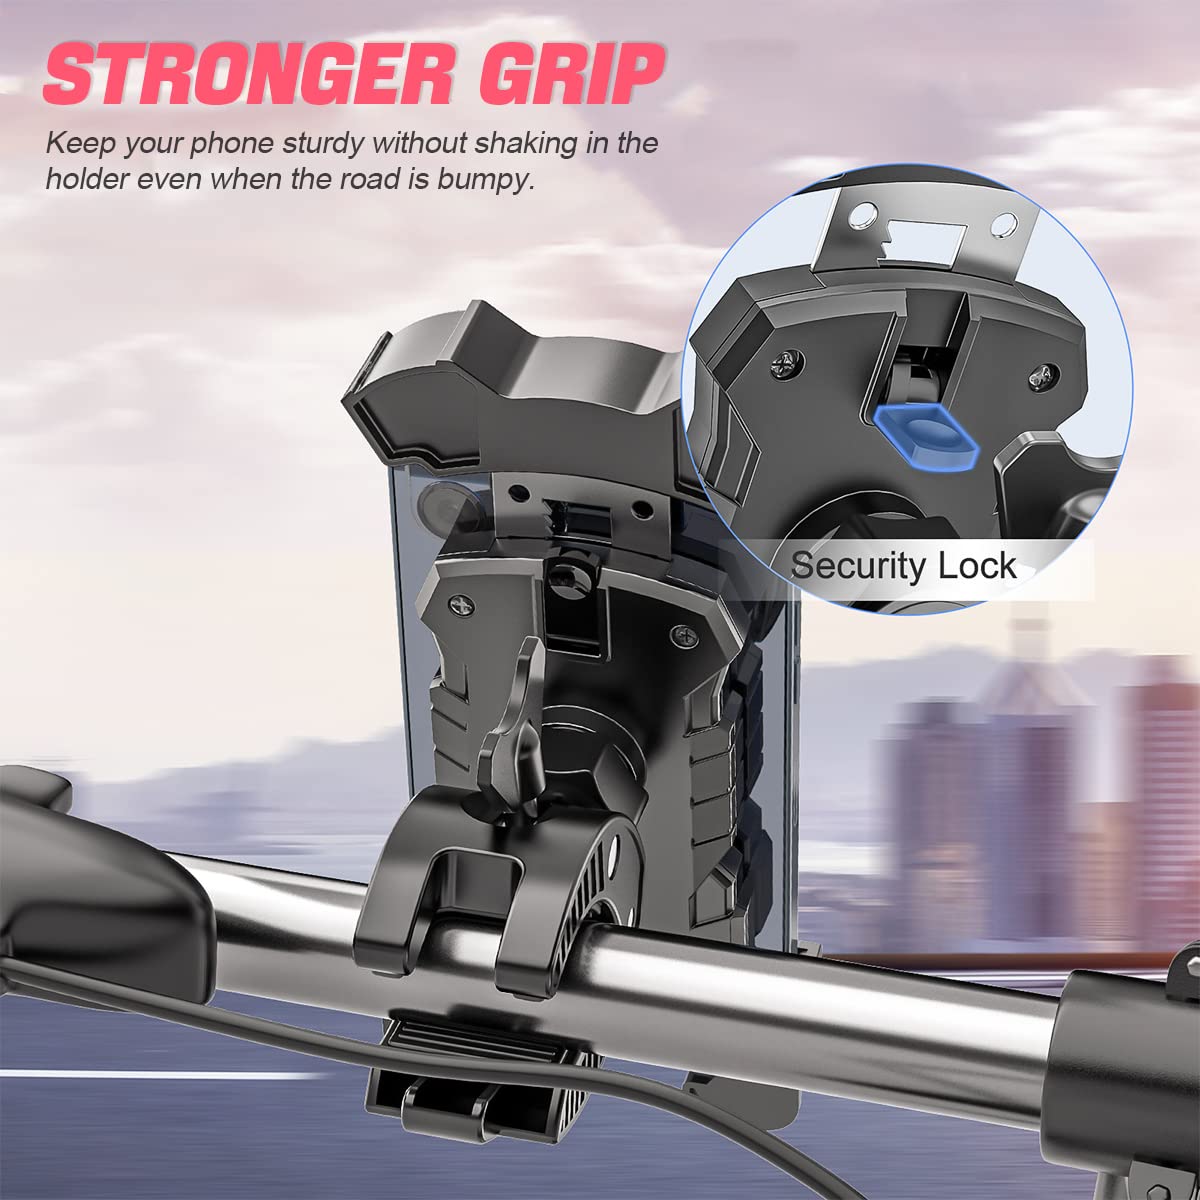 Bike Phone Holder Mount, Bicycle and Motorcycle Handlebars Friendly, 360° Rotation Easy Install and Quick Release Cellphone Holder, Universal for iphone Pro/Max/XS, Samsung Galaxy S21, Note20